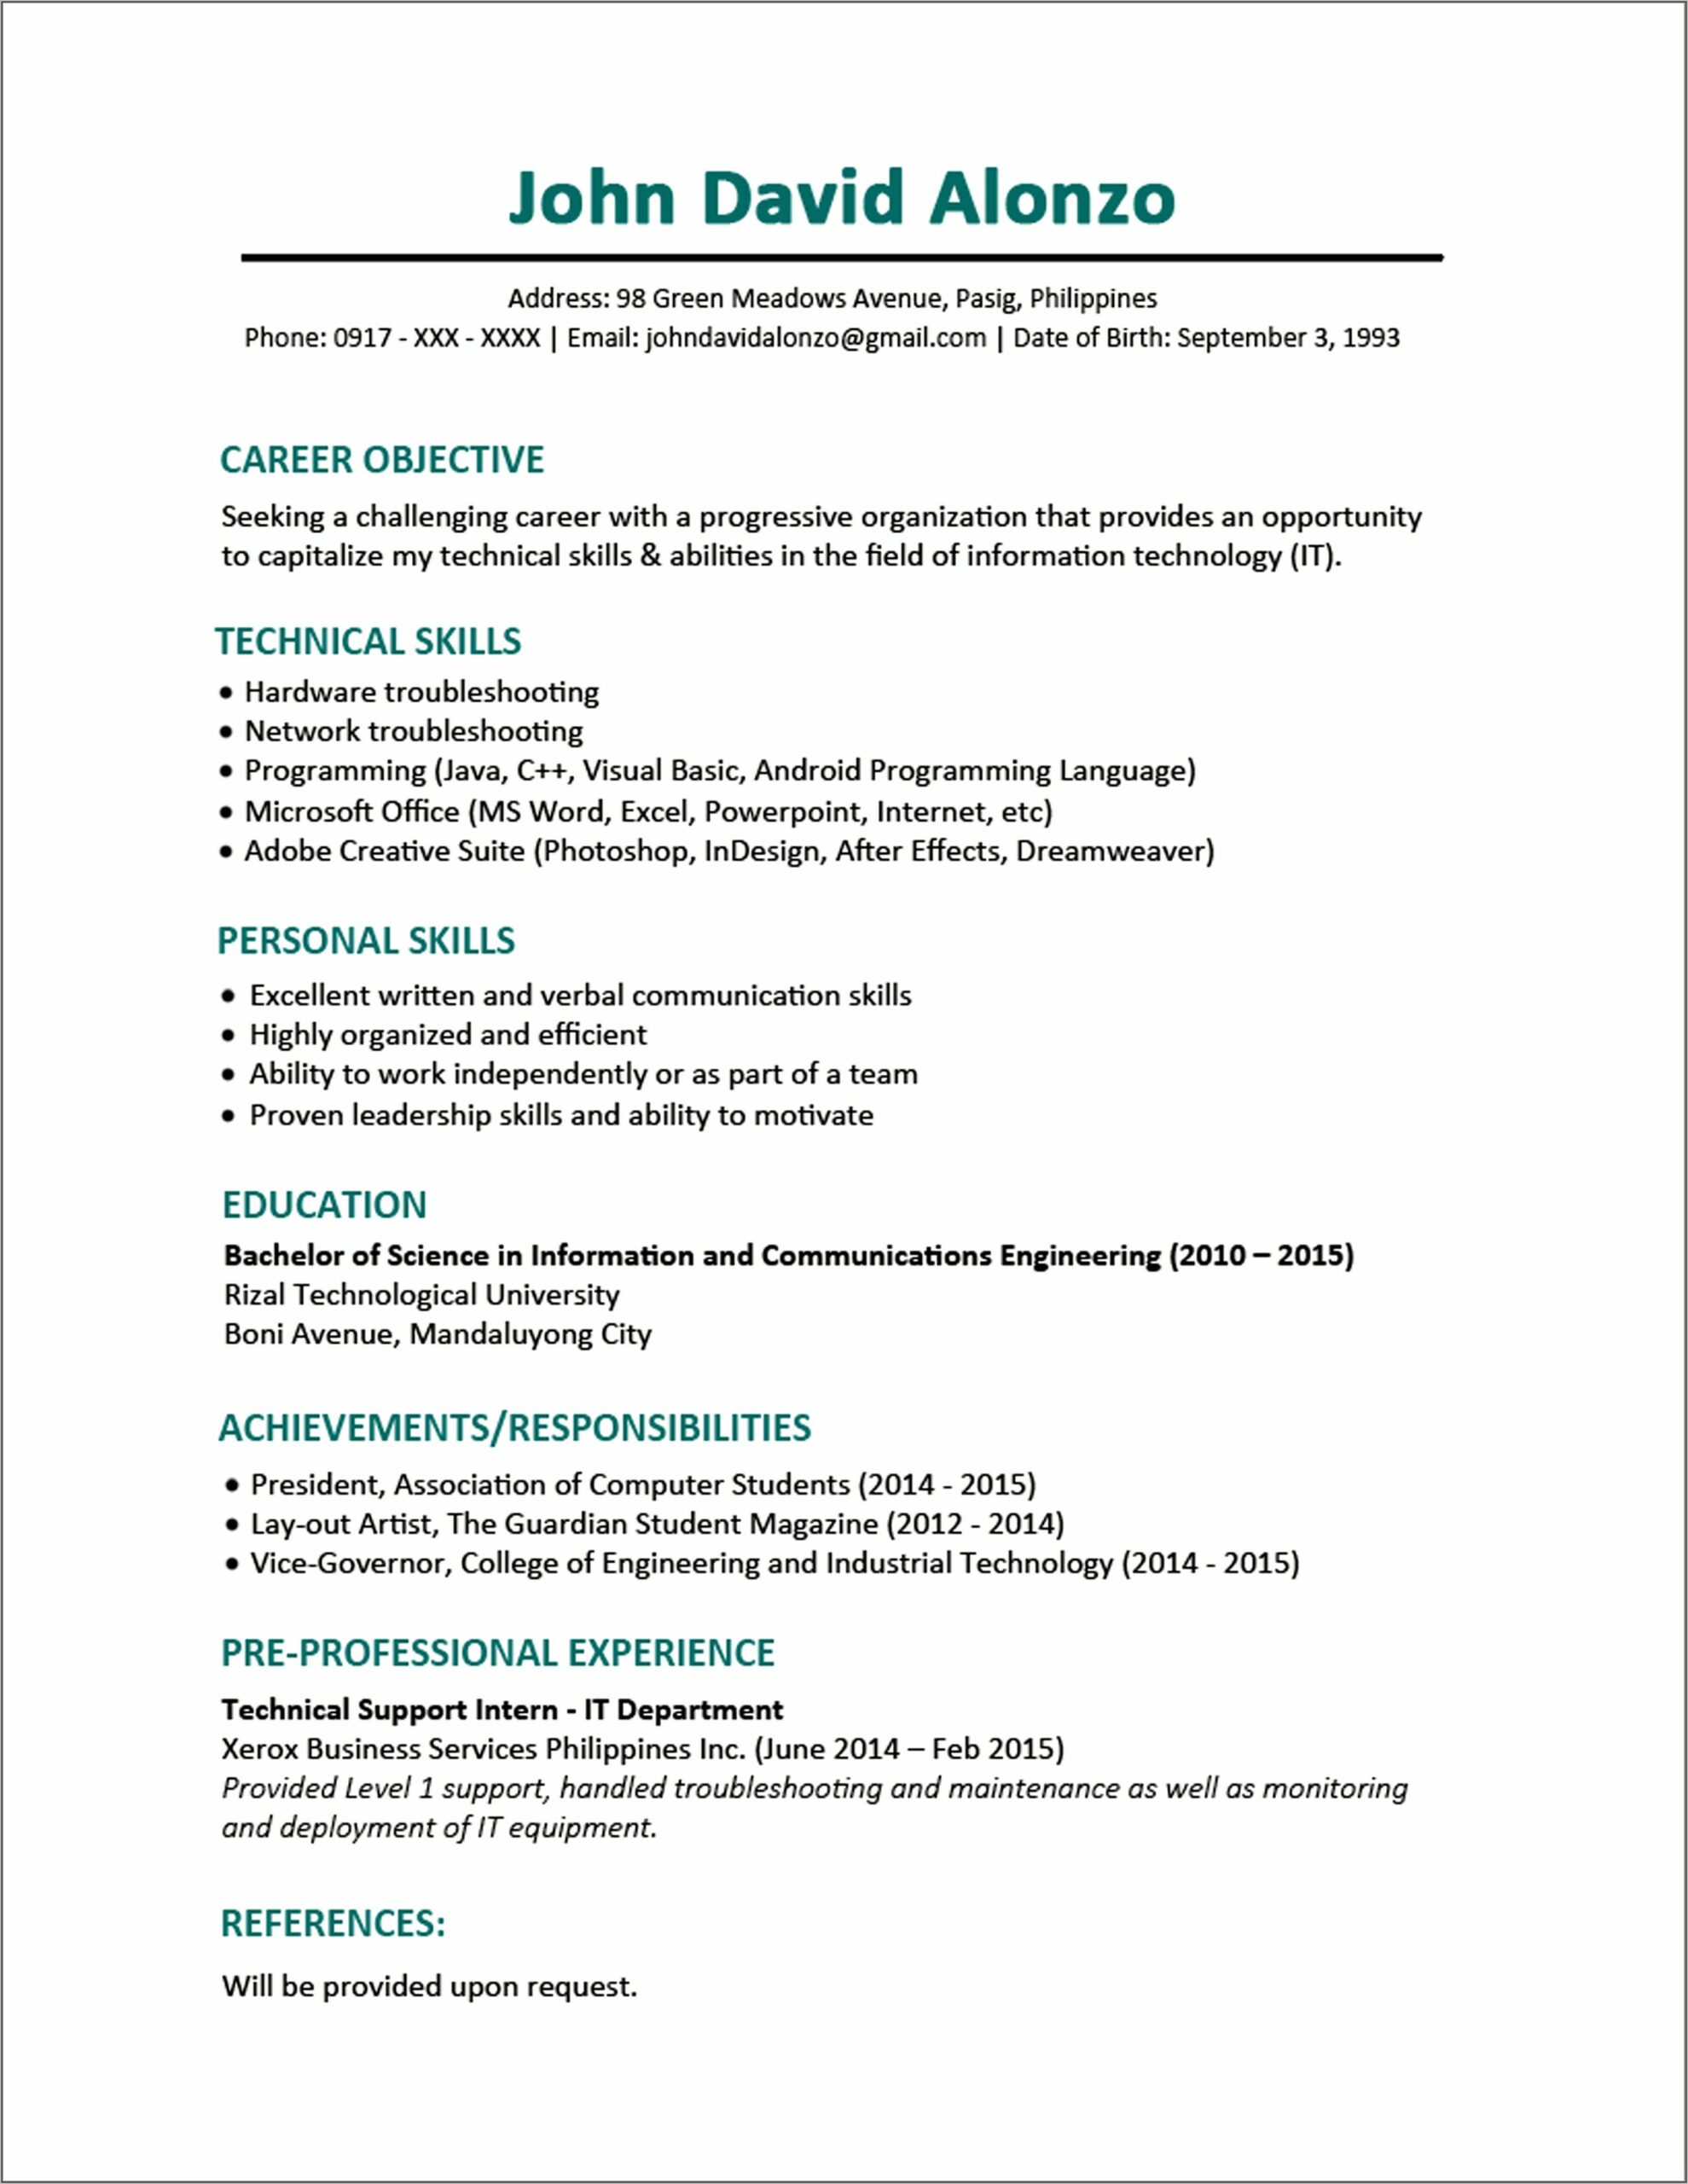 Sample Resume That Doesn't Use Dates